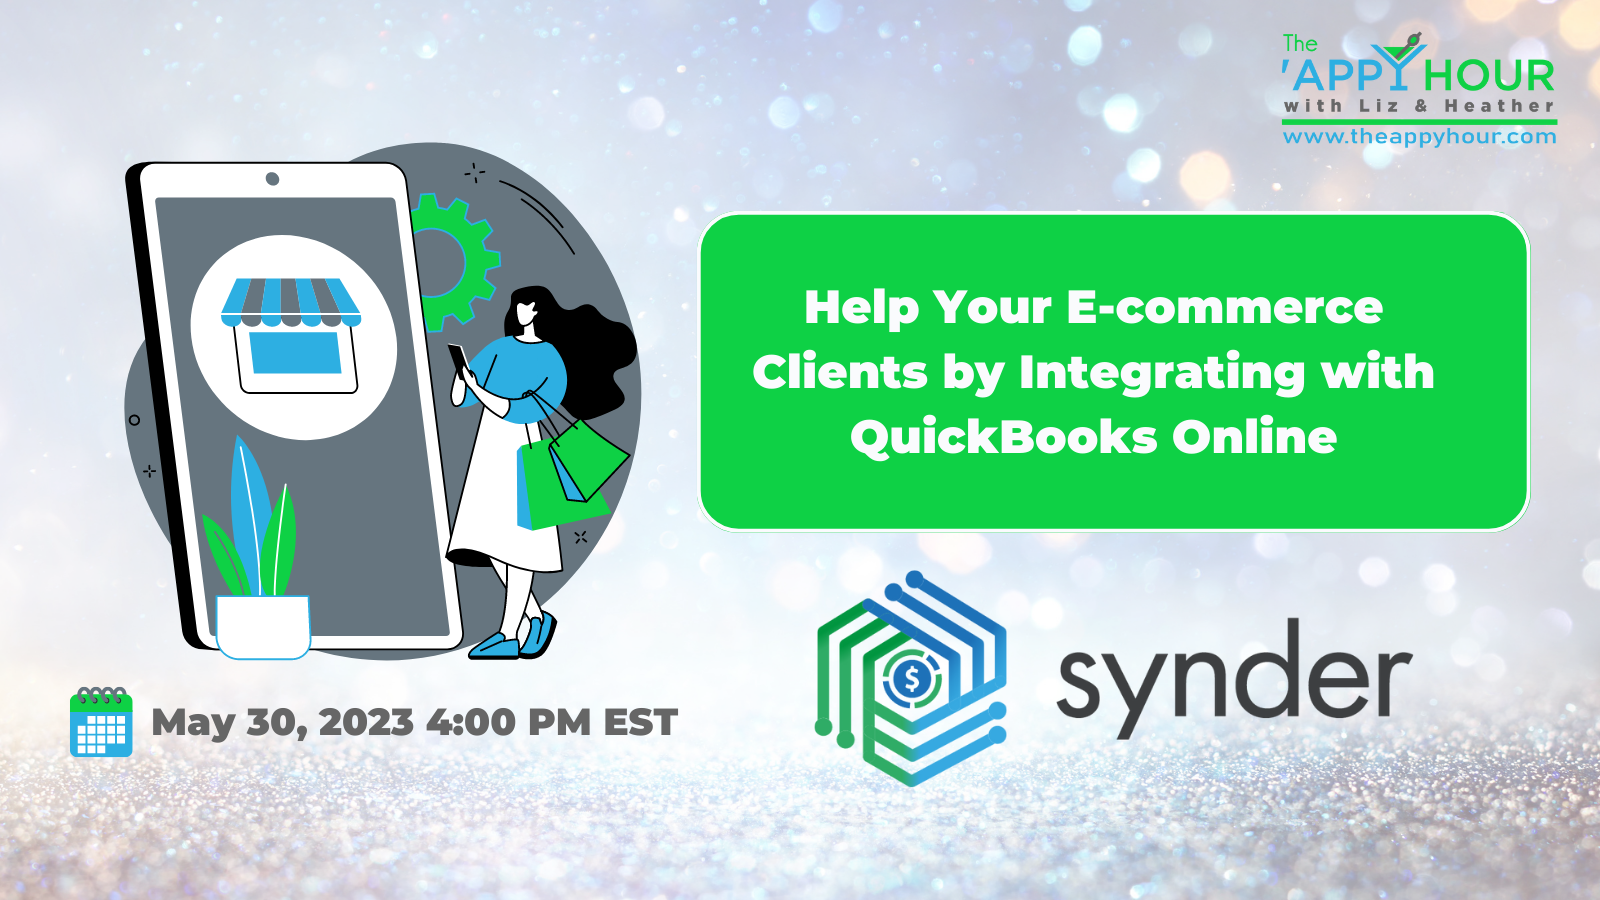 Help Your E-Commerce Clients By Integrating with Quickbooks Online